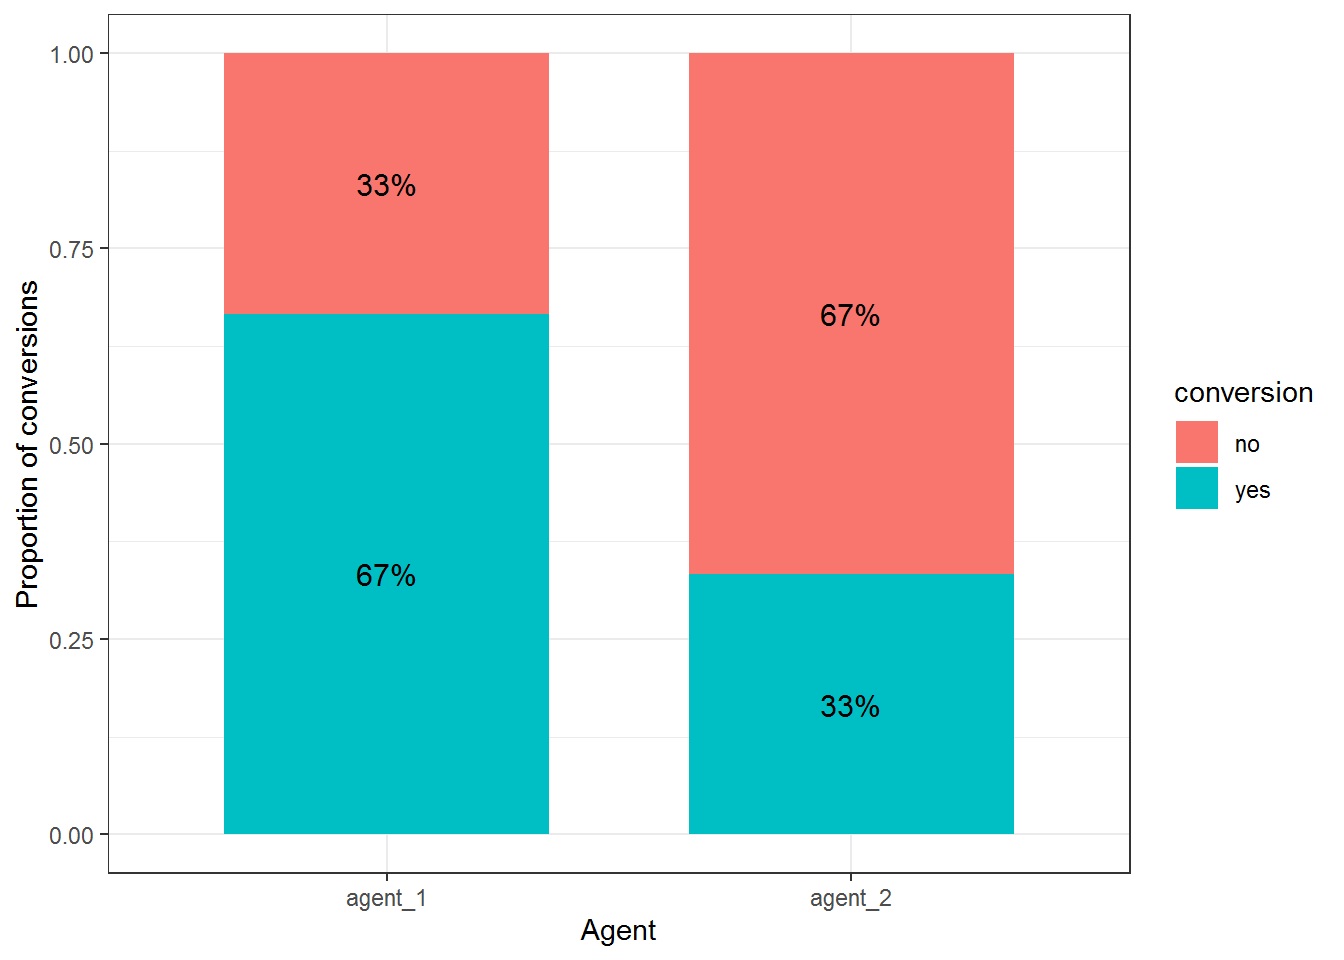 proportion of conversions per agent (stacked bar chart)